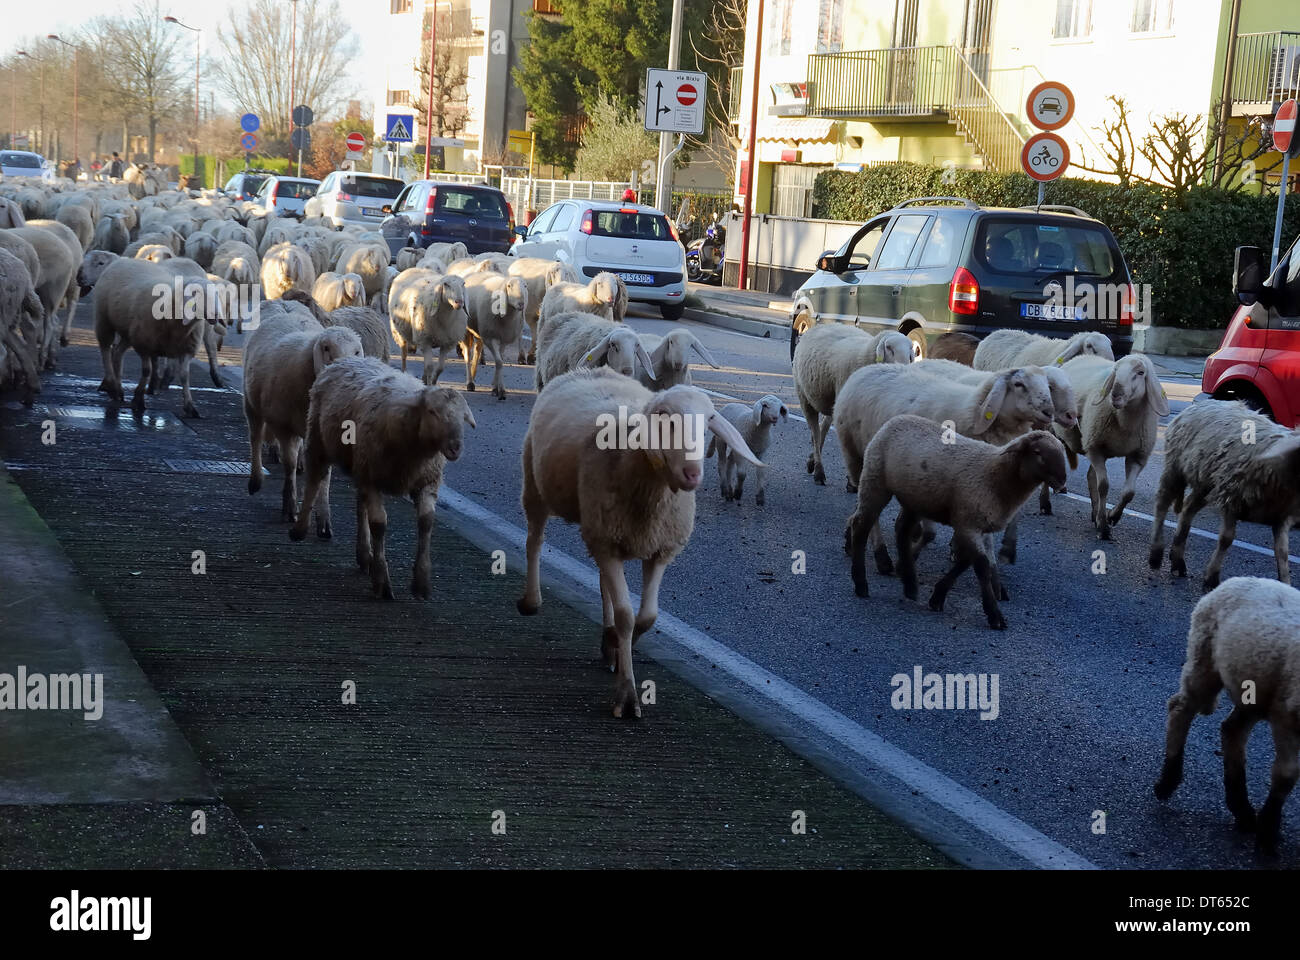 Cadoneghe, Veneto, Italy : transhumance of the sheep. A transhumant flock of sheep, on its way to the mountain pasture-lands, Stock Photo